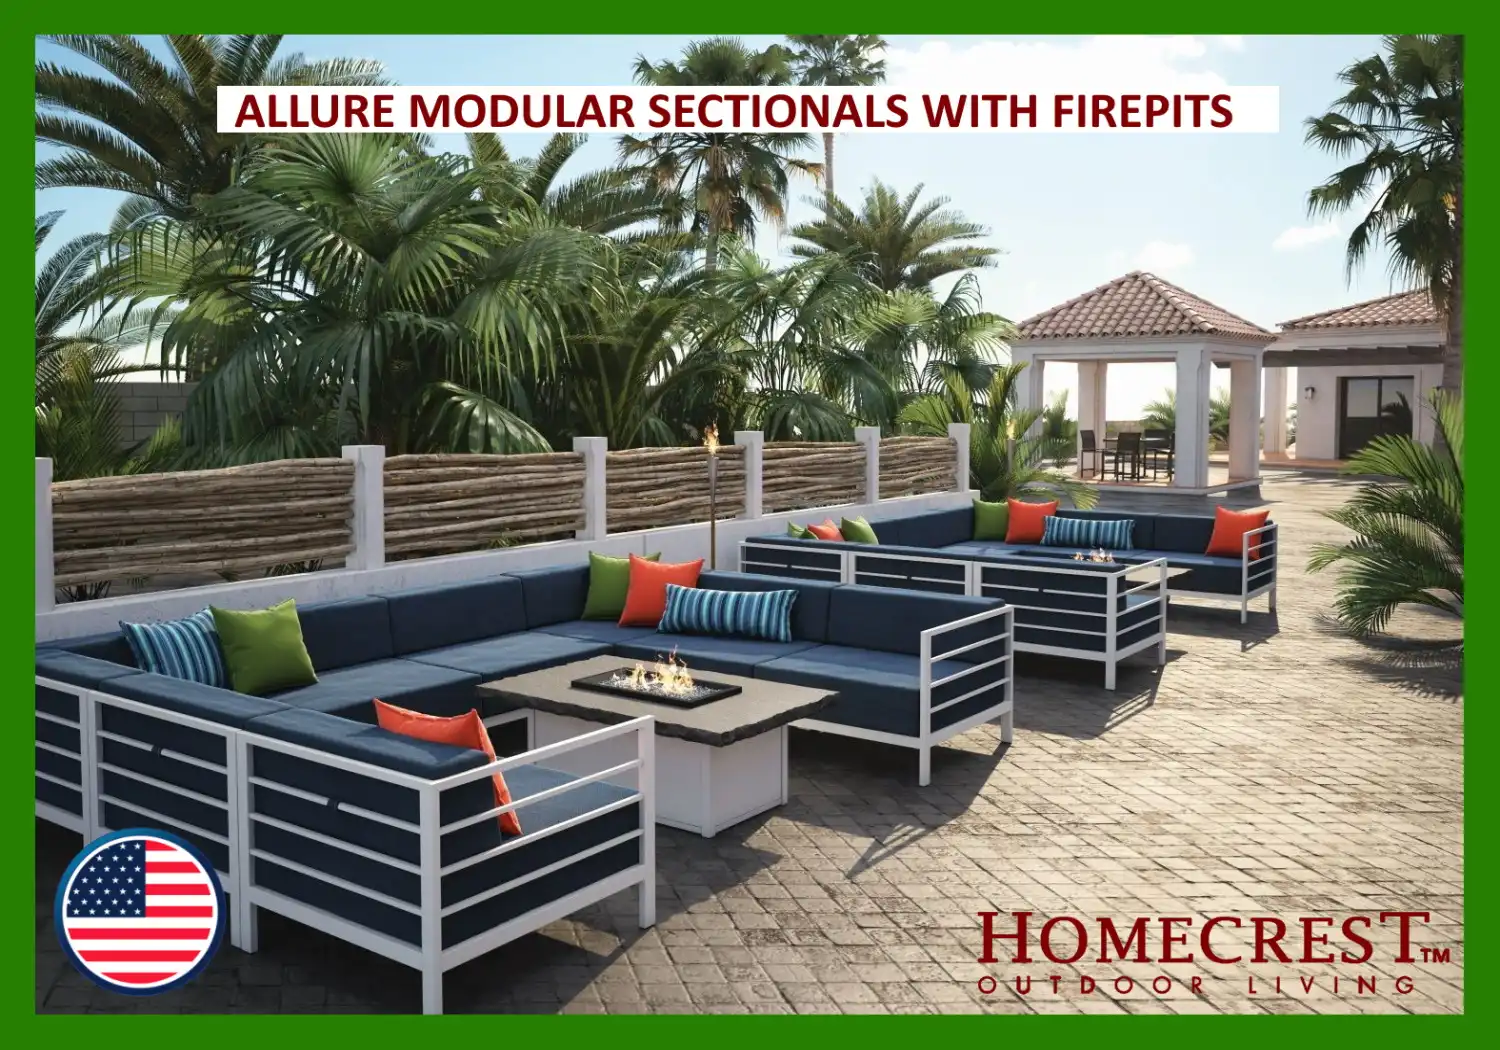 ALLURE MODULAR SECTIONALS WITH FIREPITS